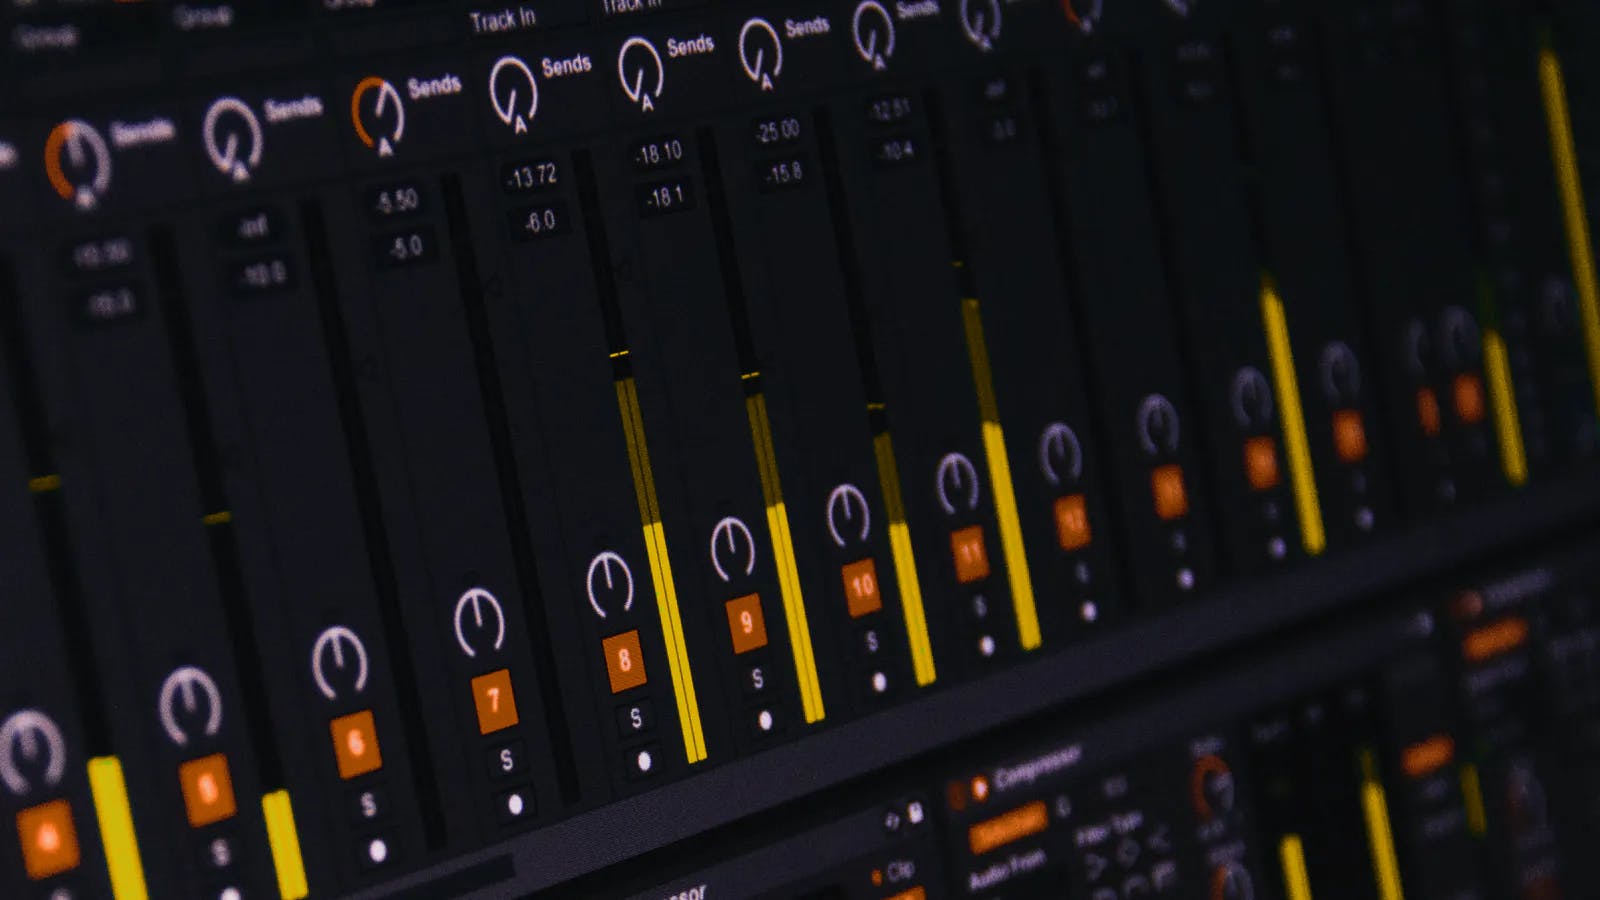 News: Antares has released Auto-Tune Access 10.